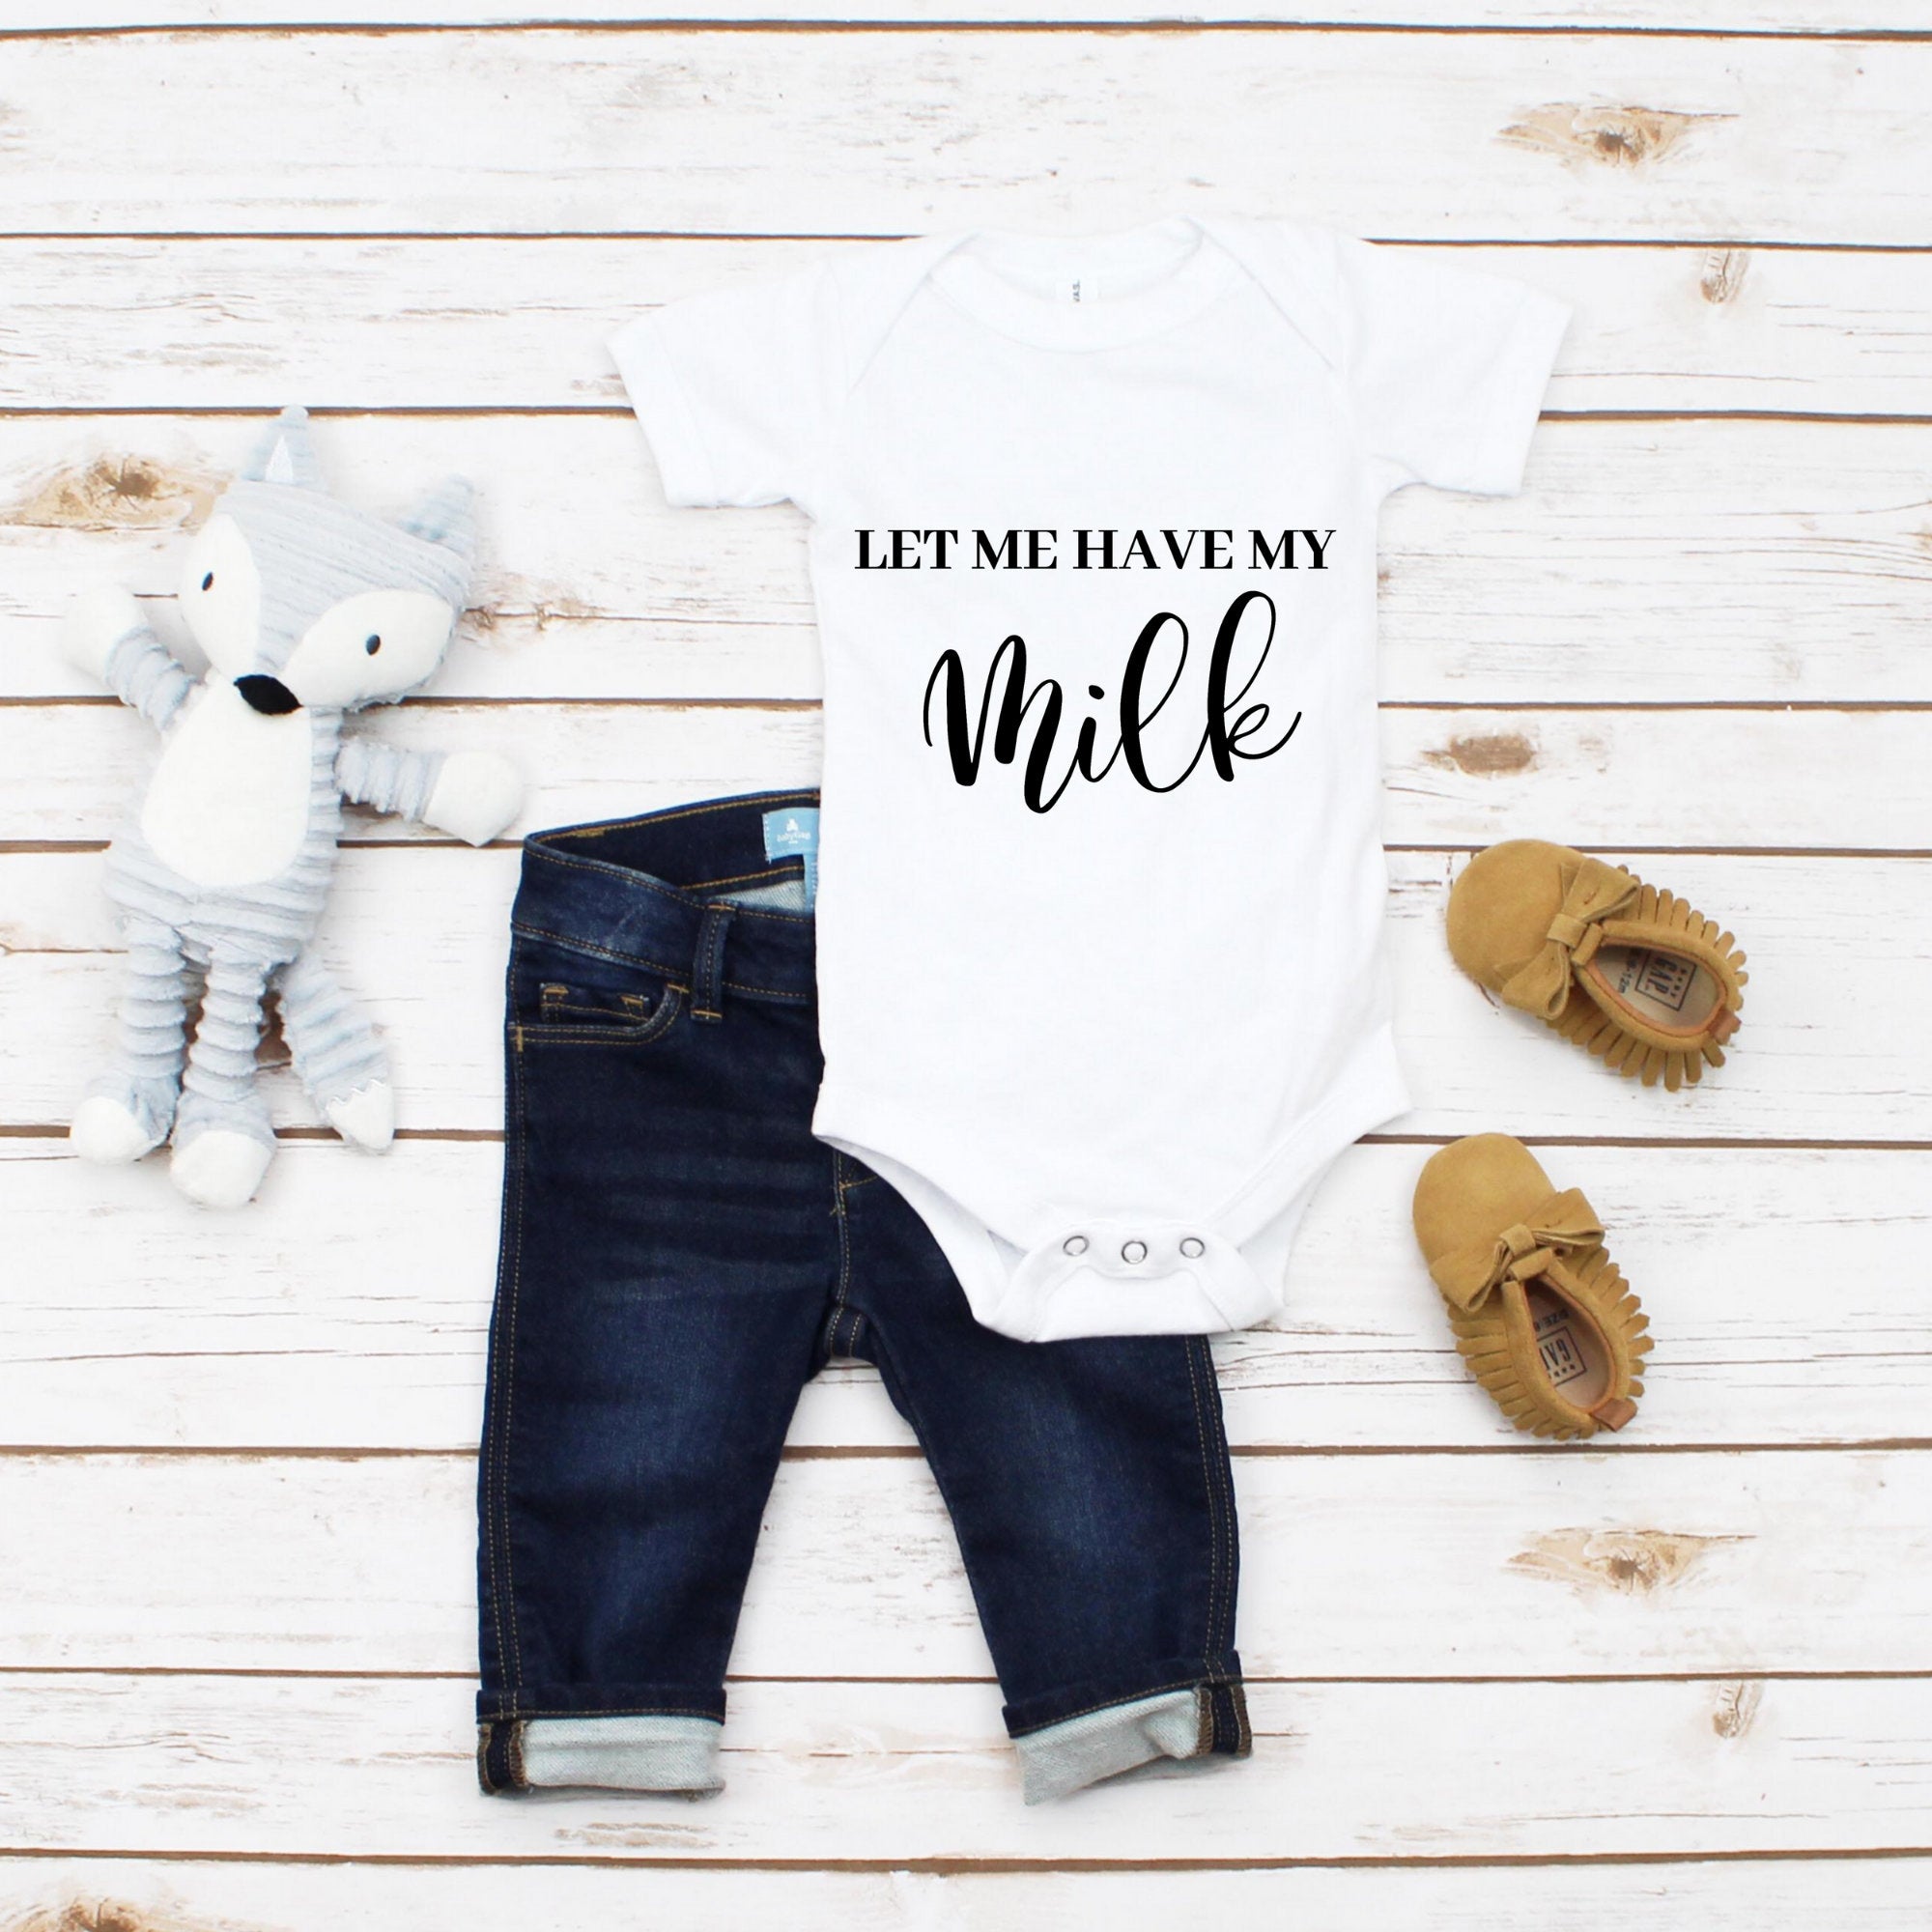 Let Me Have My Milk Tee-Let Me Have My Coffee,Dad and Son Matching Shirts,Daddy And Me Matching,Gift For Dad And Son, Dad And Son Shirts - MamaBuzz Creations